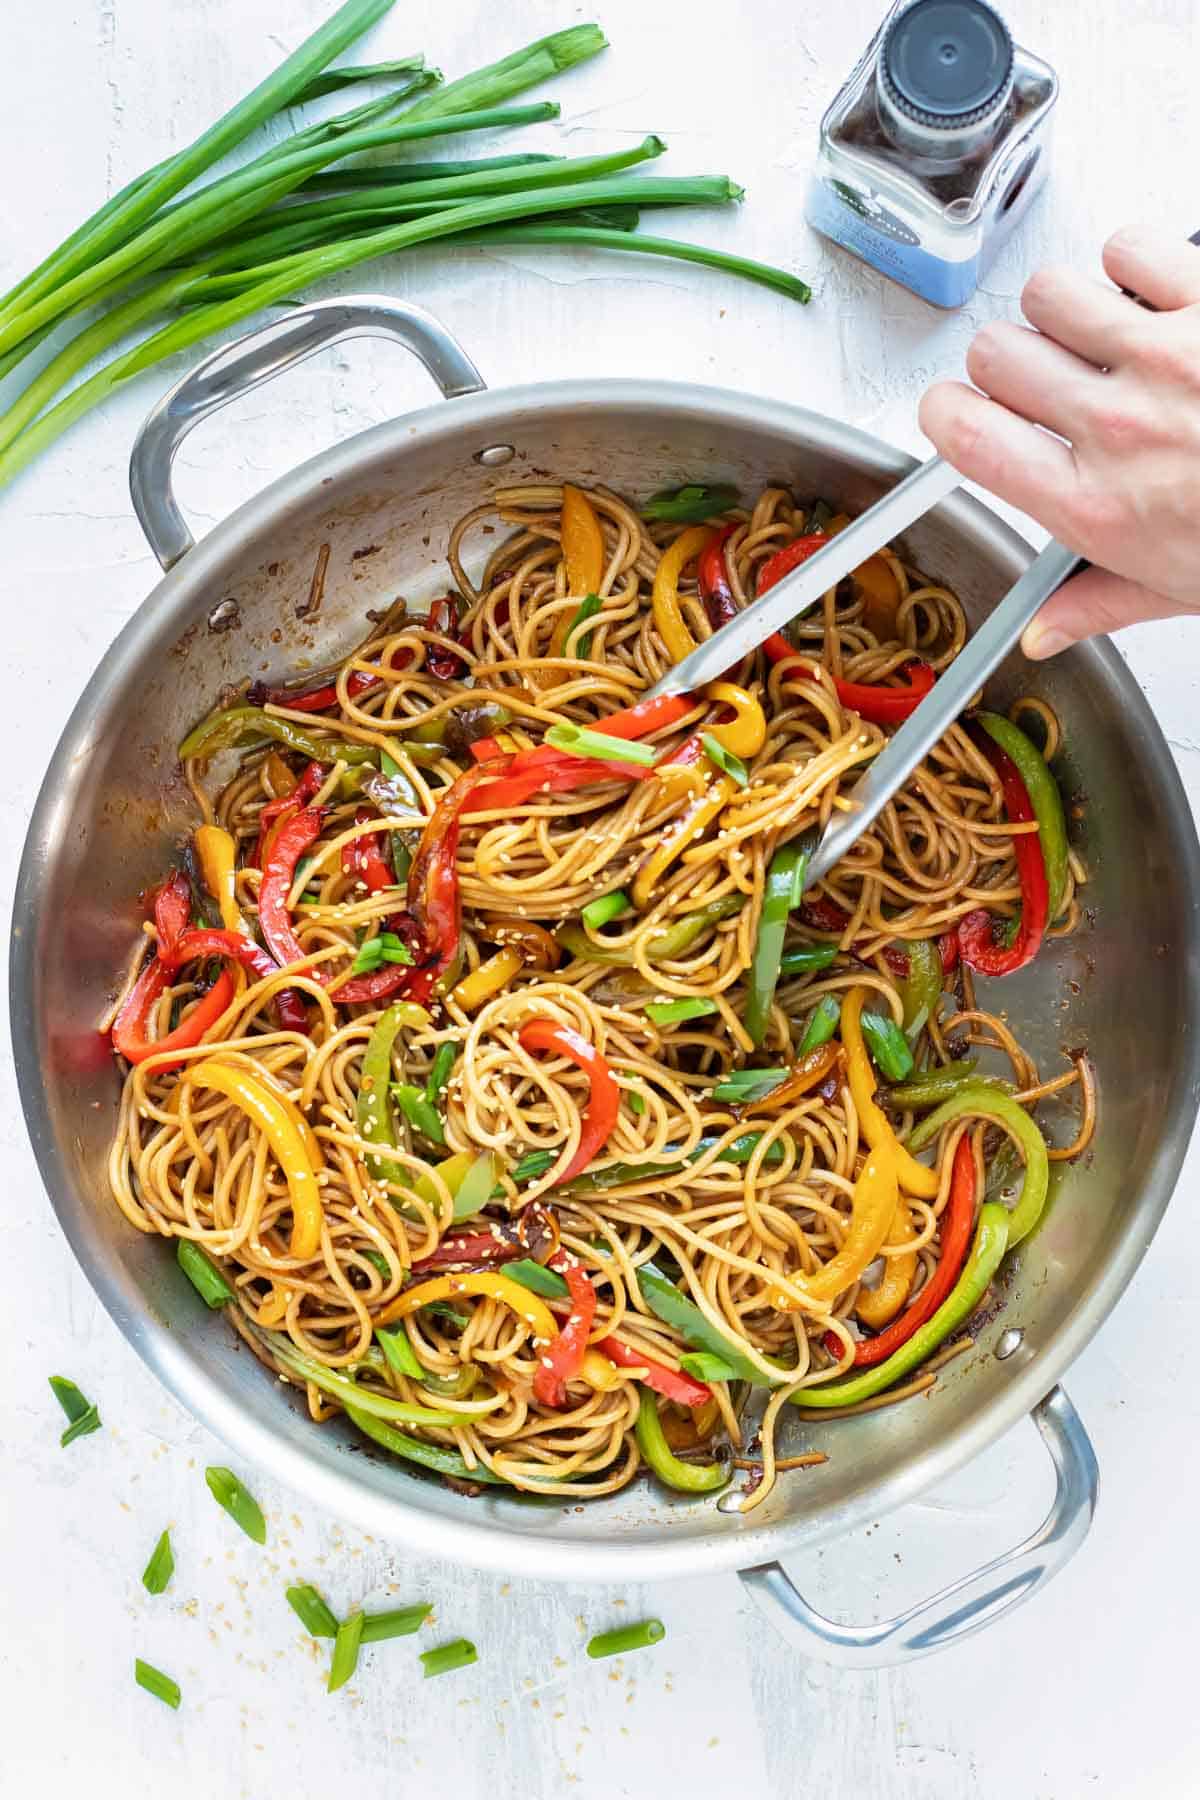 A hand with tongs tossing around a wok full of sesame noodles with garlic, ginger, and bell peppers.